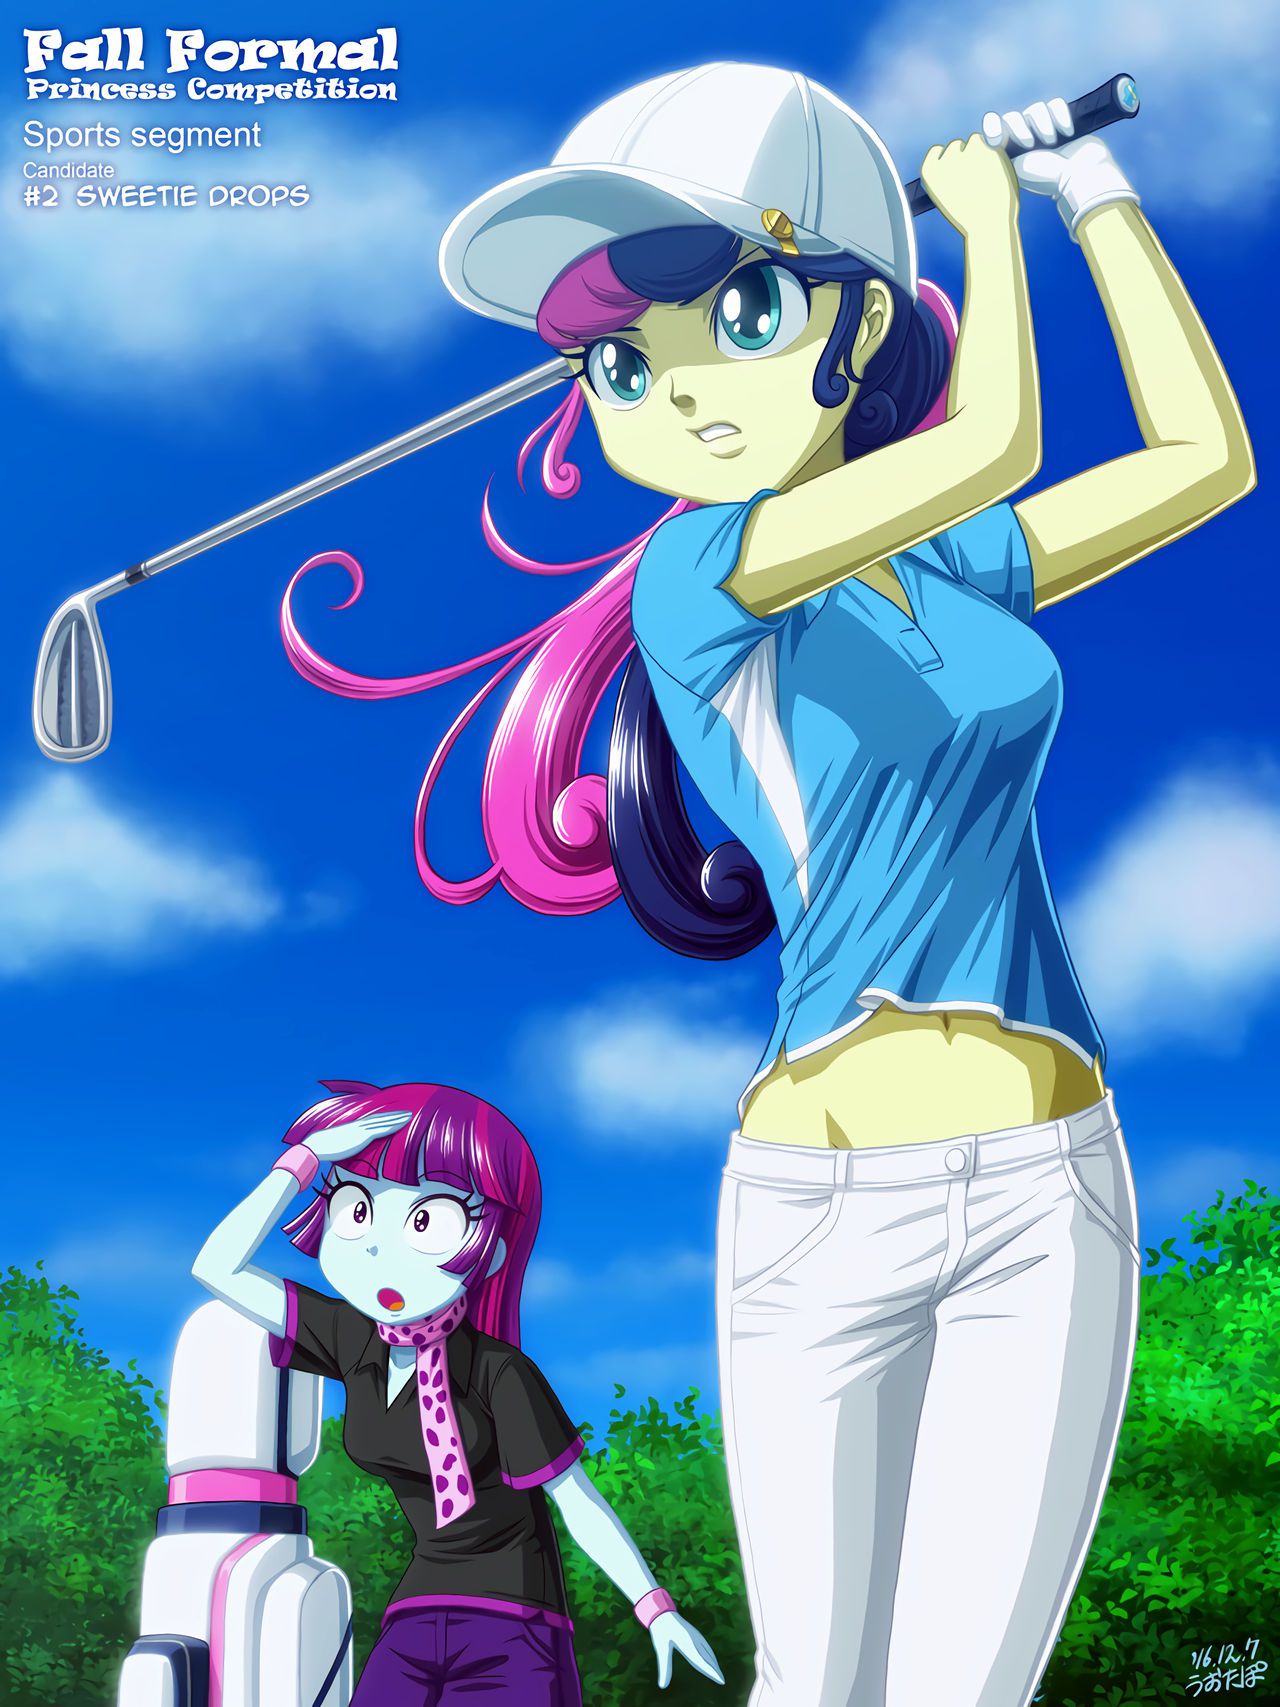 [uotapo] Fall Formal Princess Competition Sports Segment [optimized] [webp torrent] 2